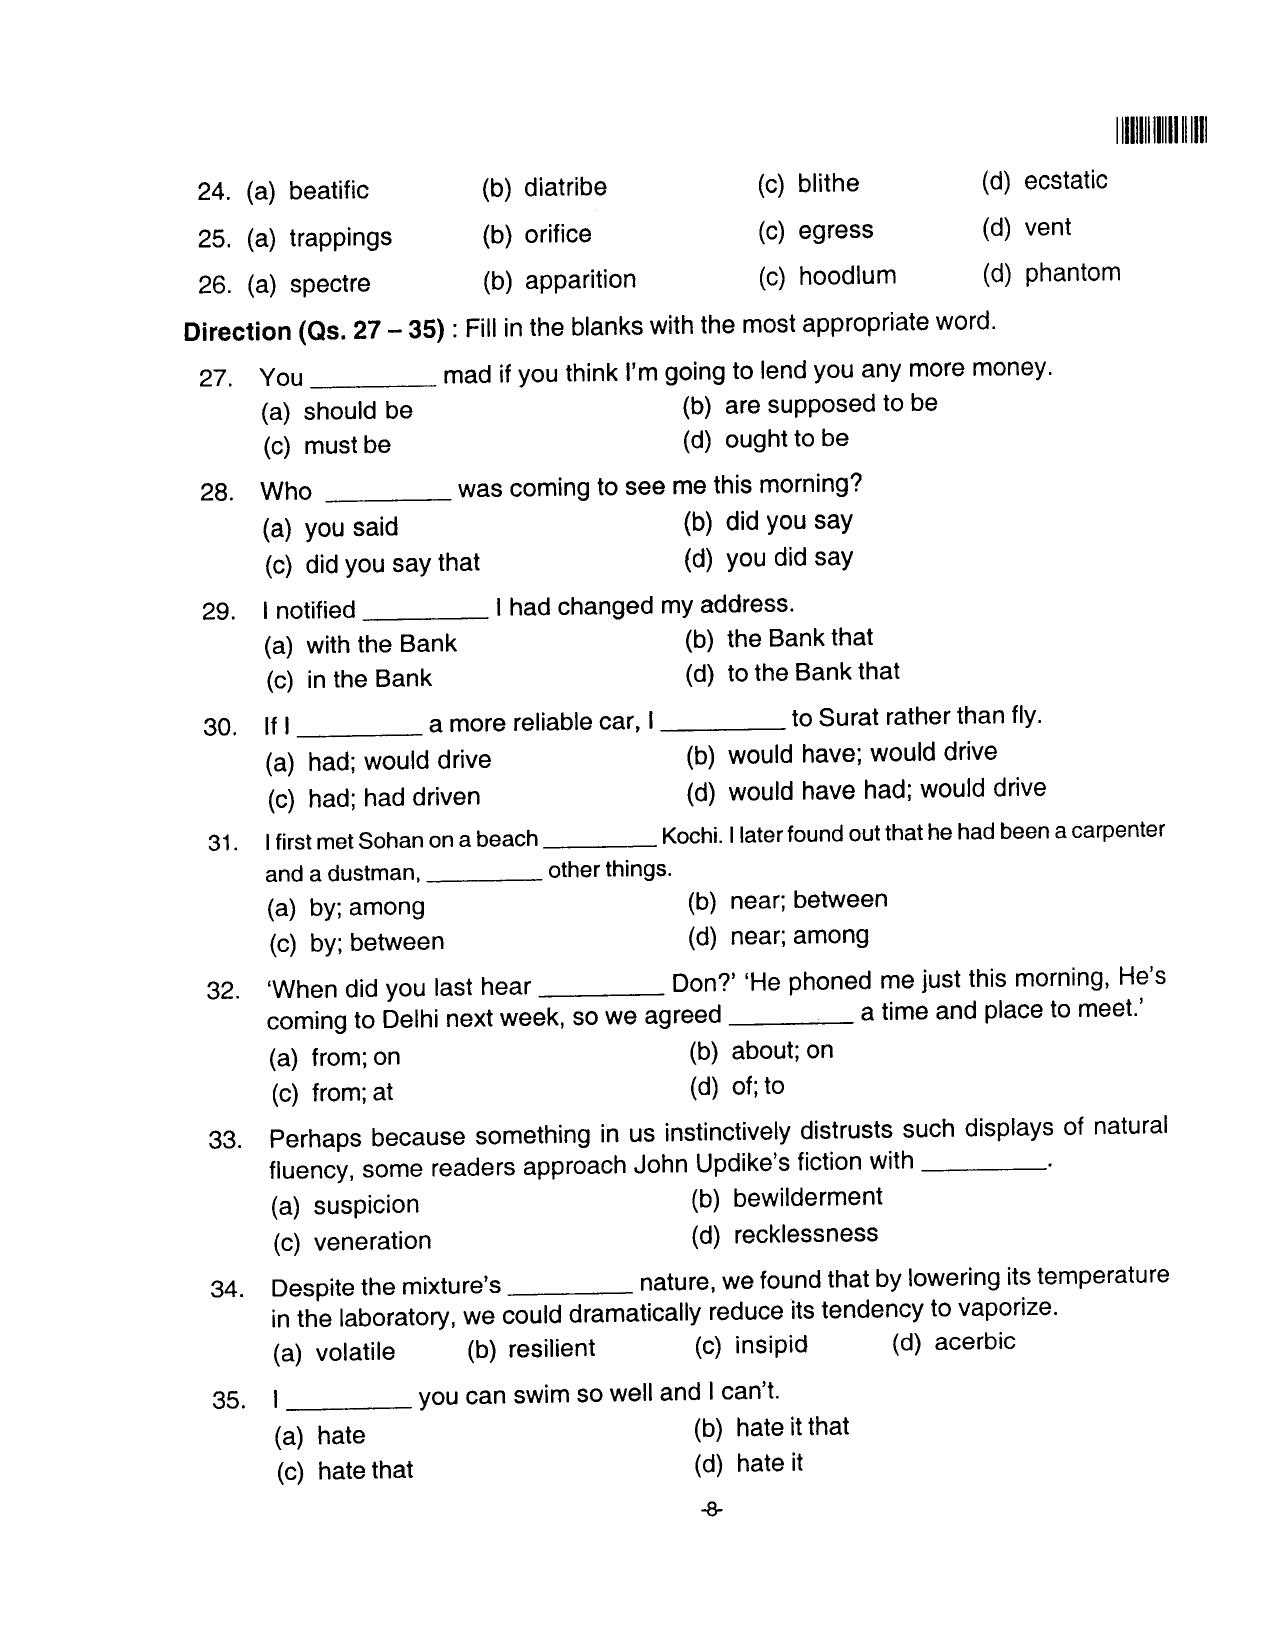 AILET 2016 Question Paper for BA LLB - Page 8